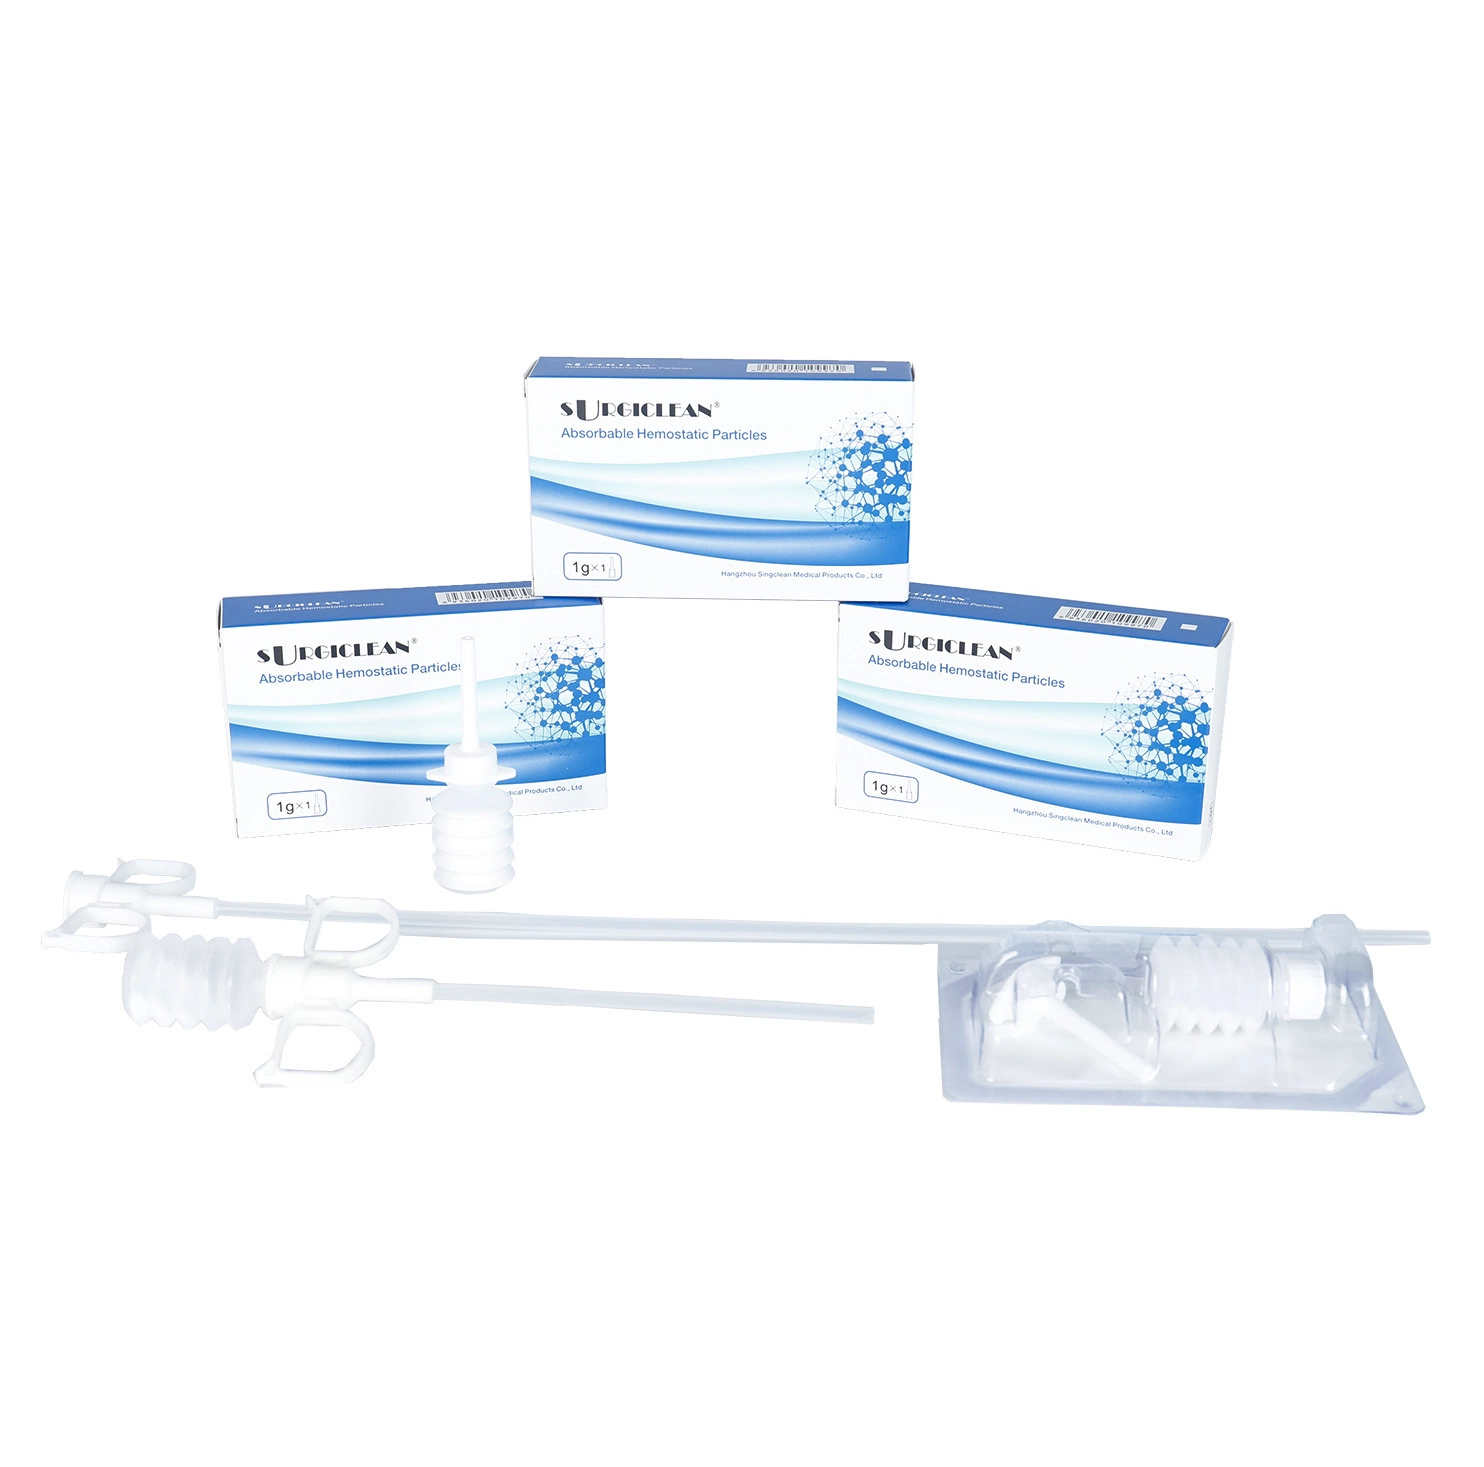 Surgiclean Supplies Materials Absorbable Hemostatic Particles Hospital